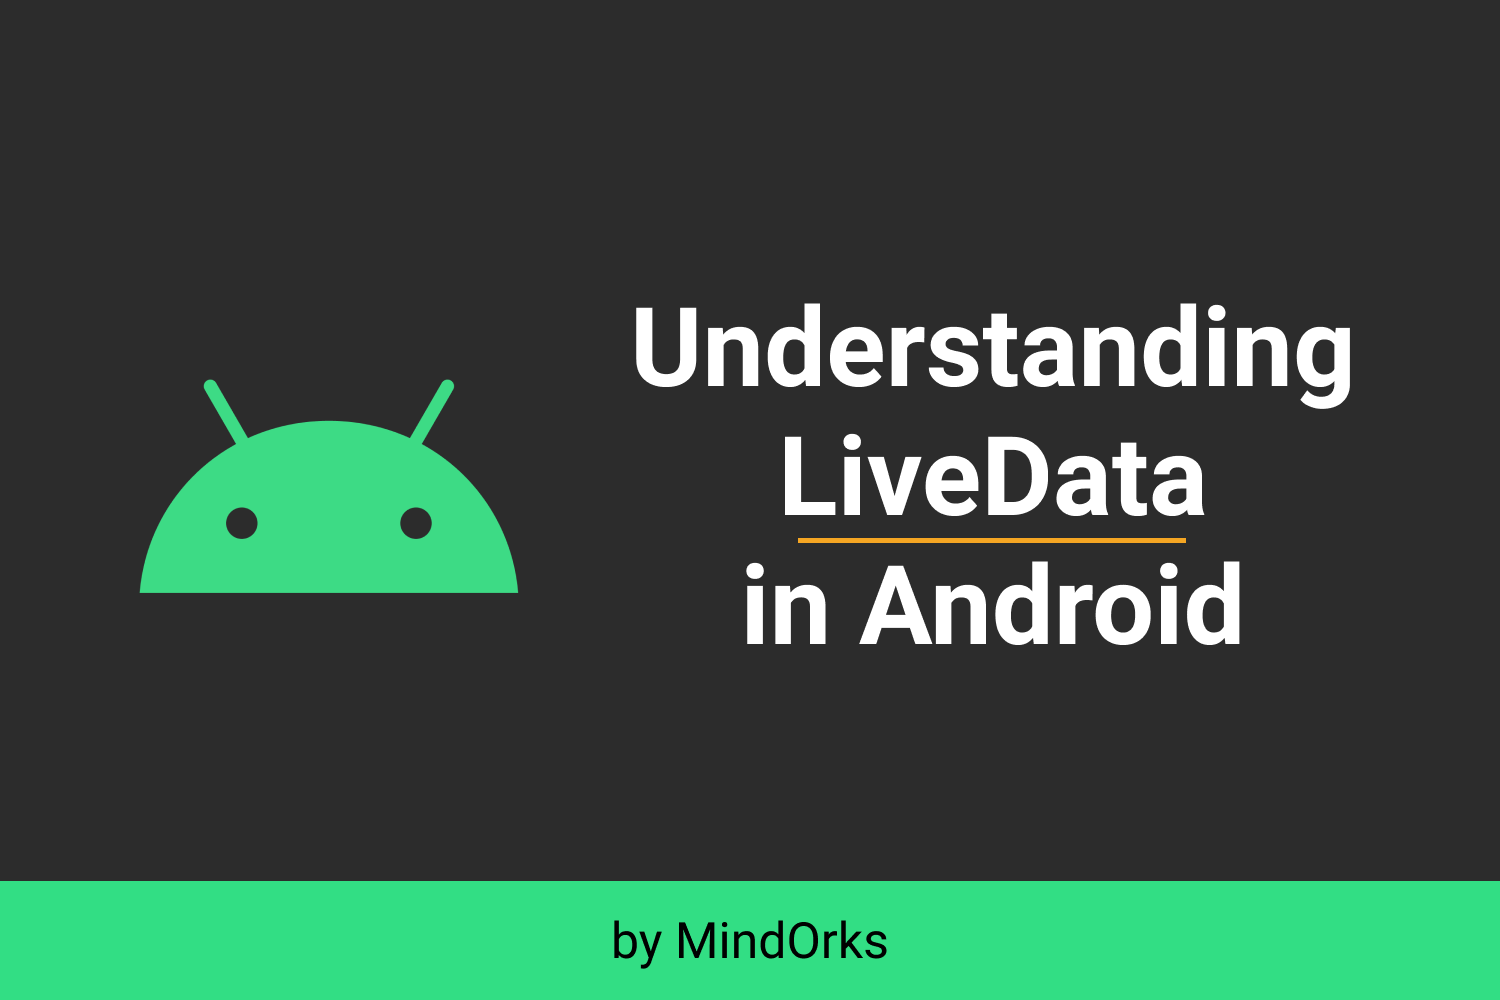 Understanding LiveData in Android